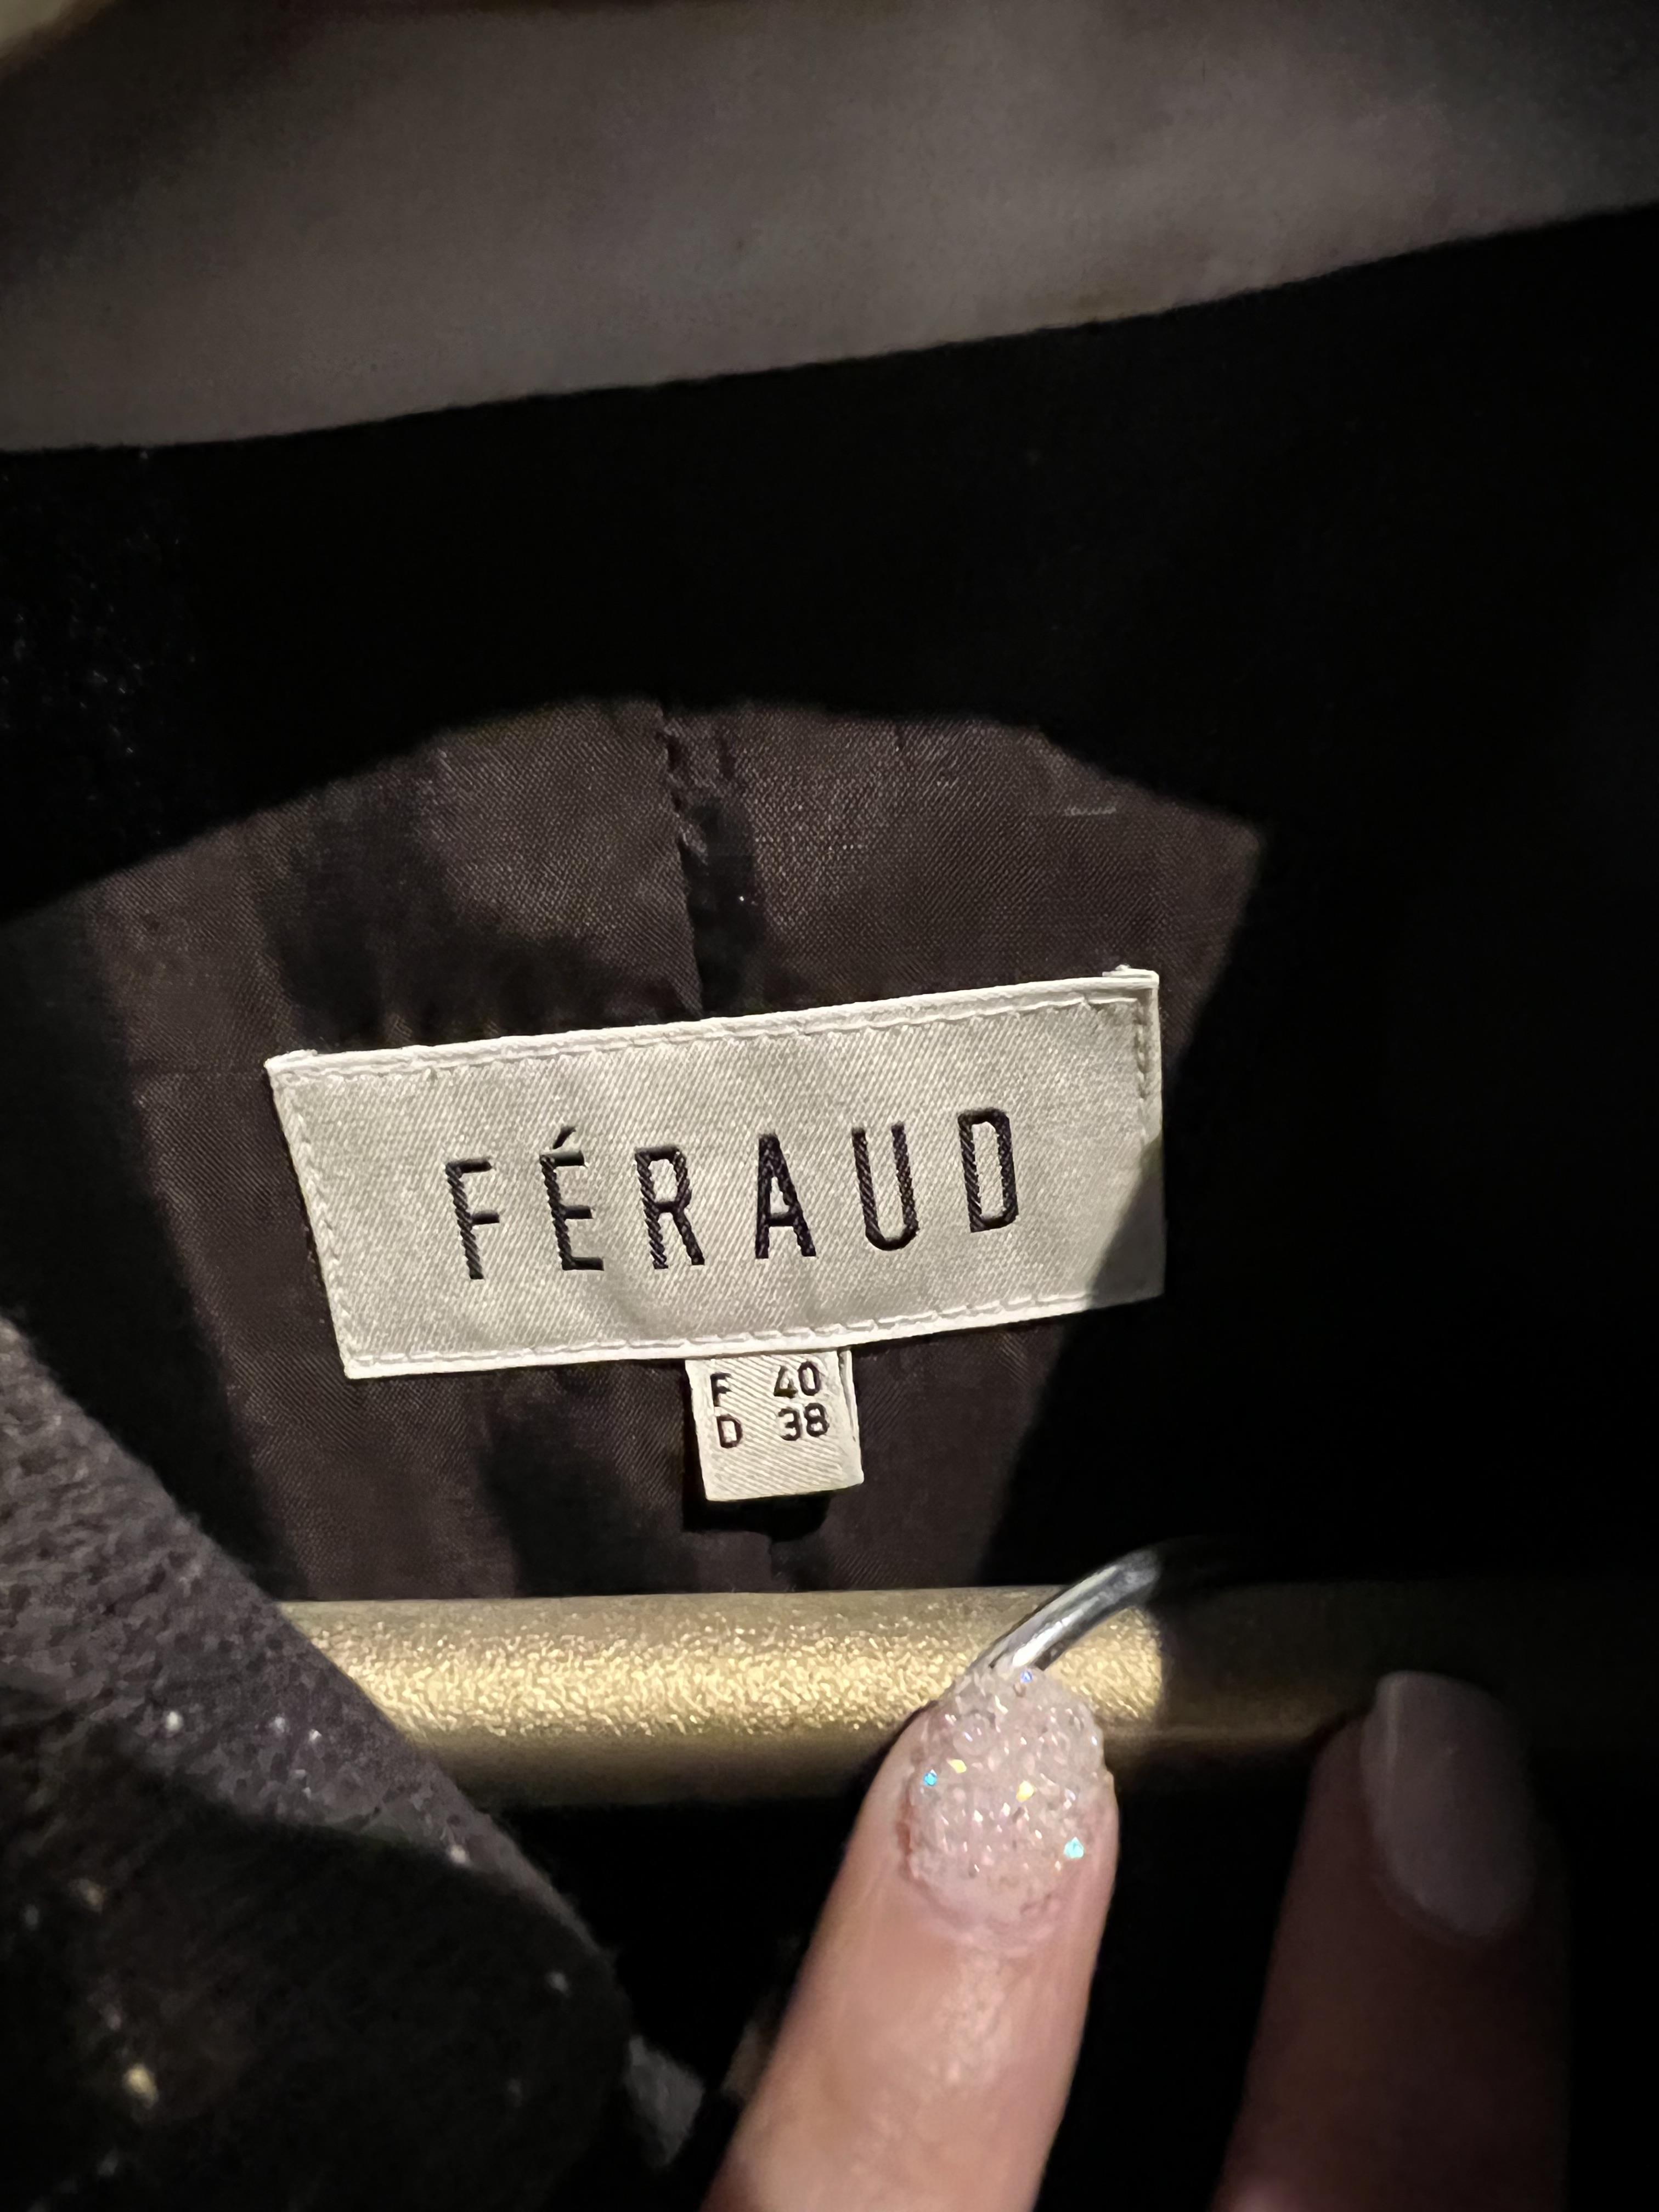 FERAUD, A MATCHING SKIRT AND SUIT JACKET. (size M) - Image 2 of 3